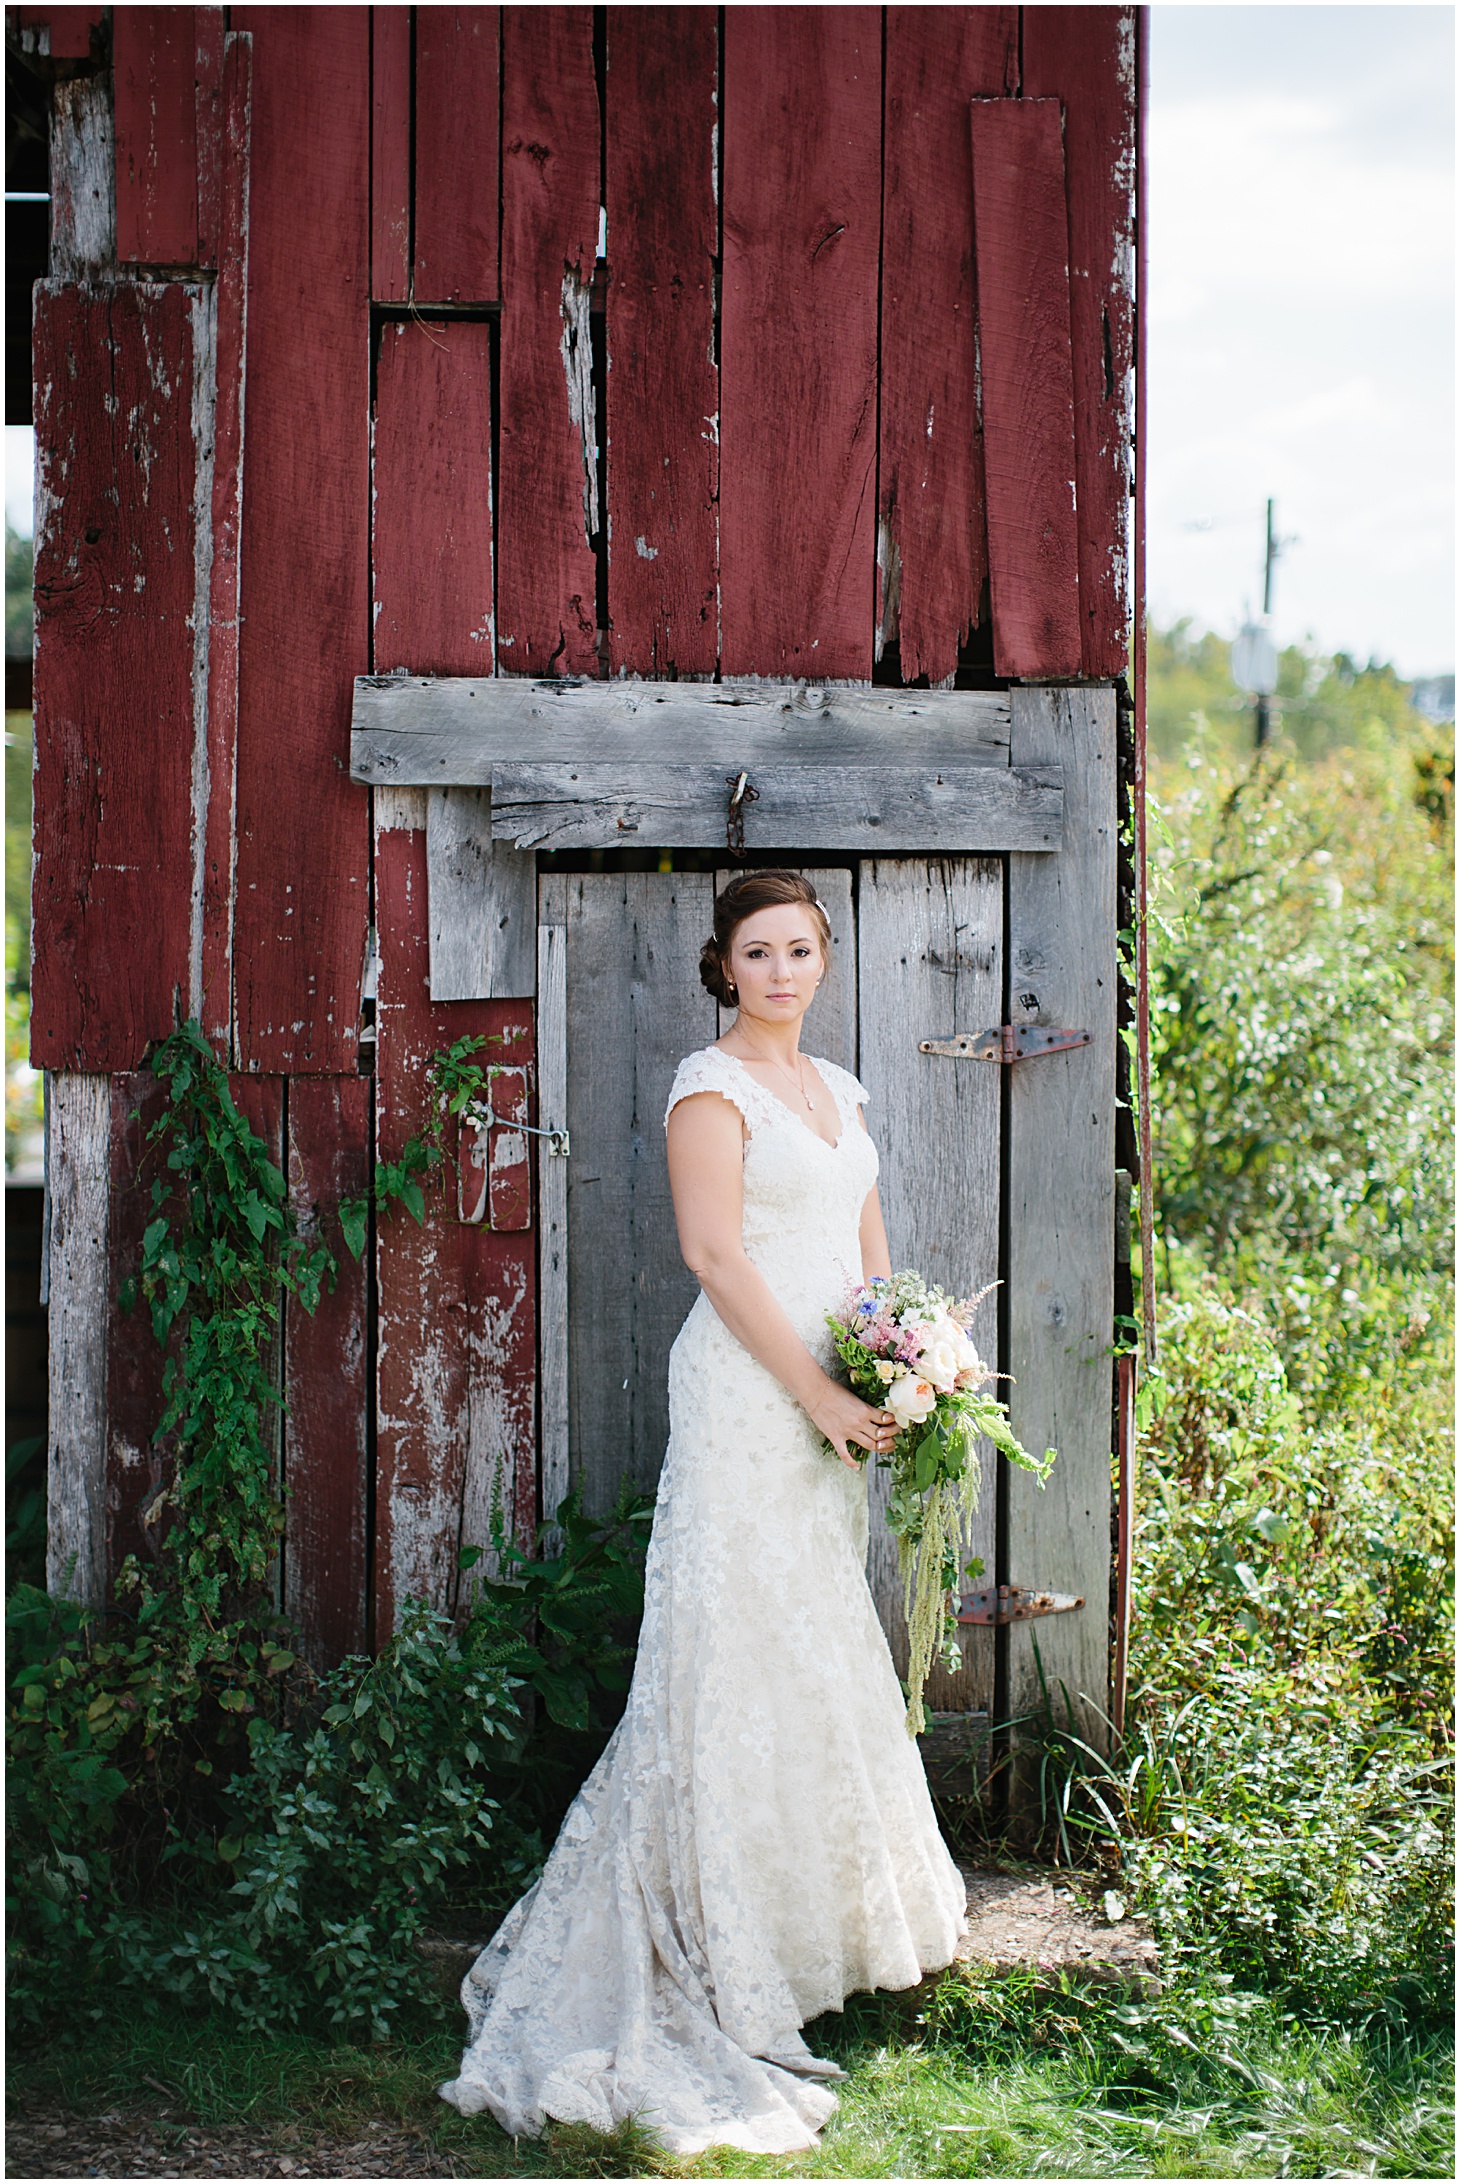 Rustic Floral Wedding at Rocklands Farm & Winery by Sarah Bradshaw Photography_0009